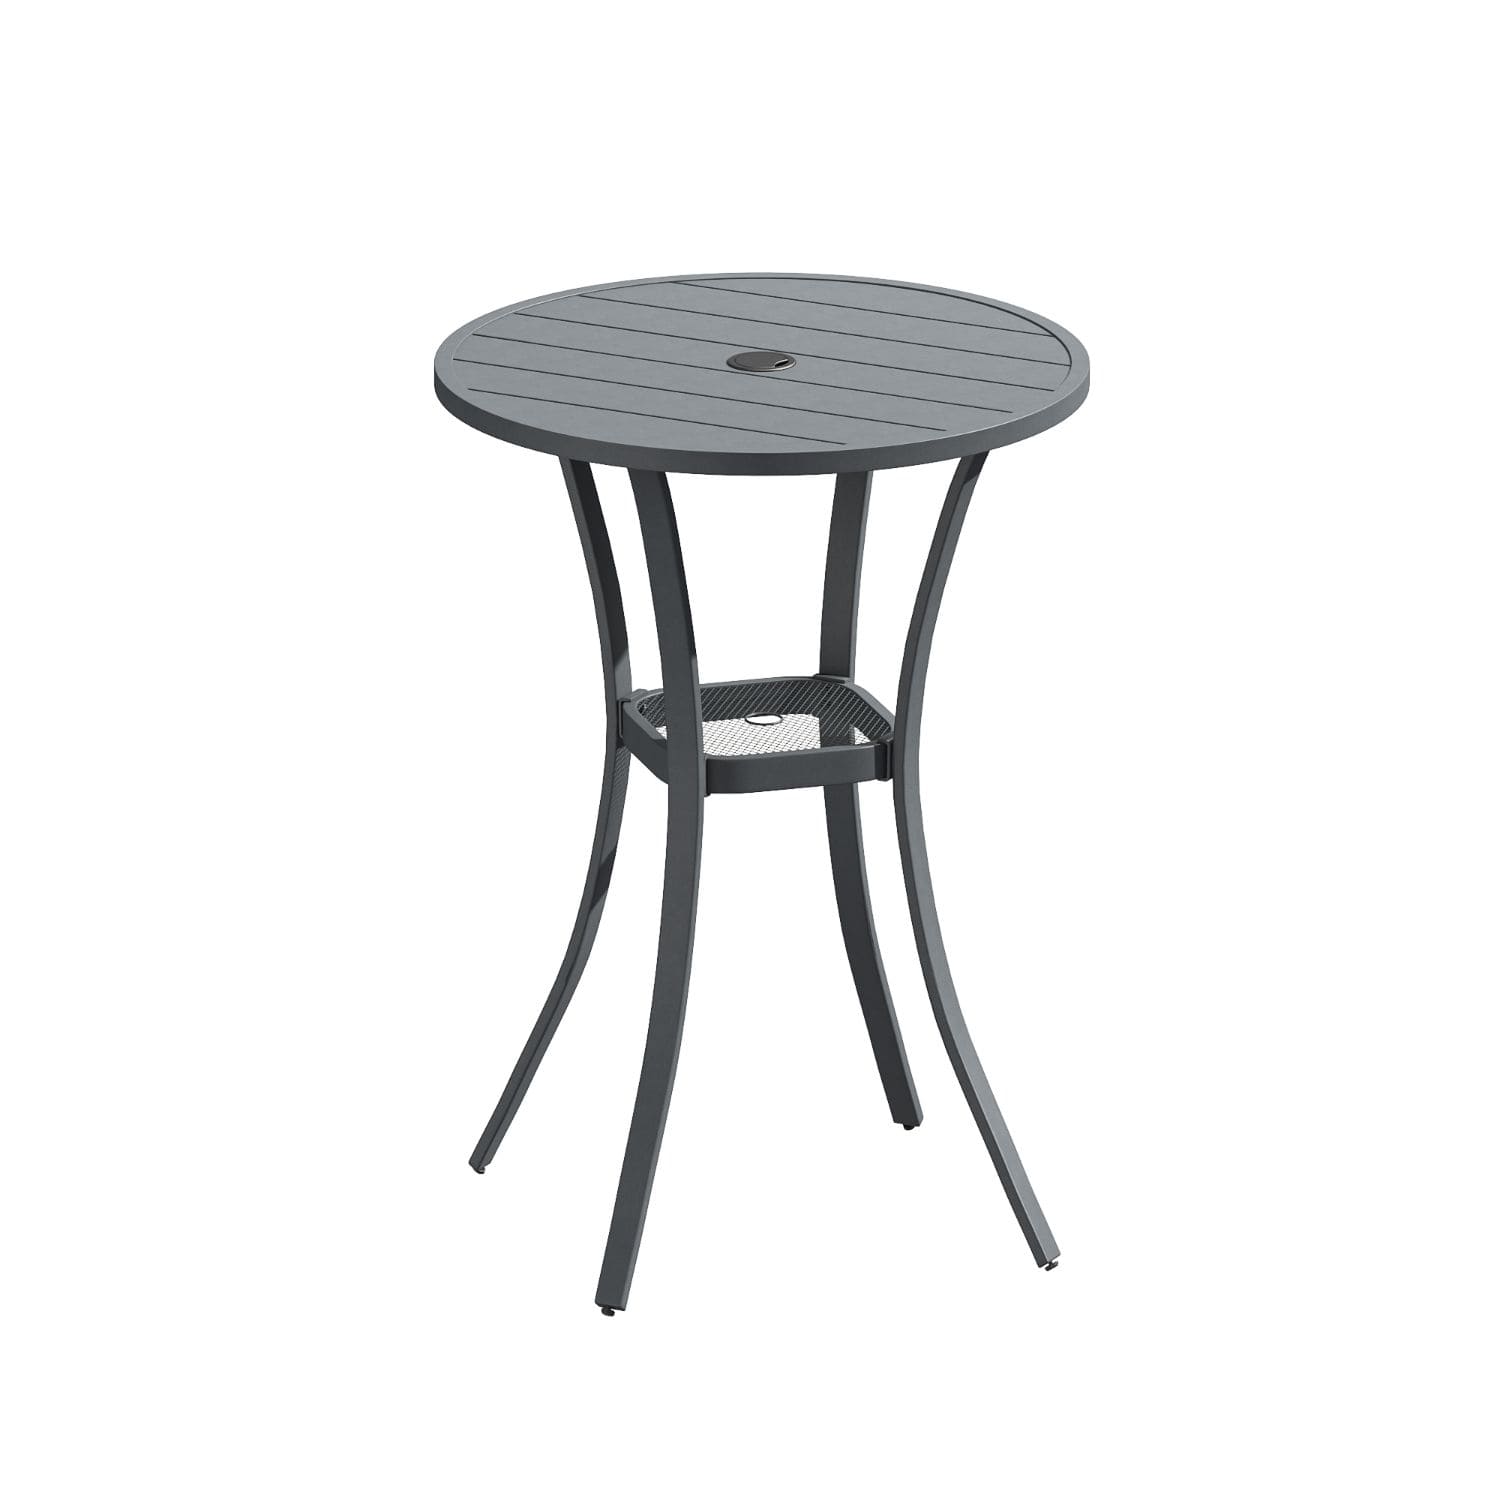 Vicllax Outdoor 28" Round Bar Table with Umbrella Hole and Storage Shelf